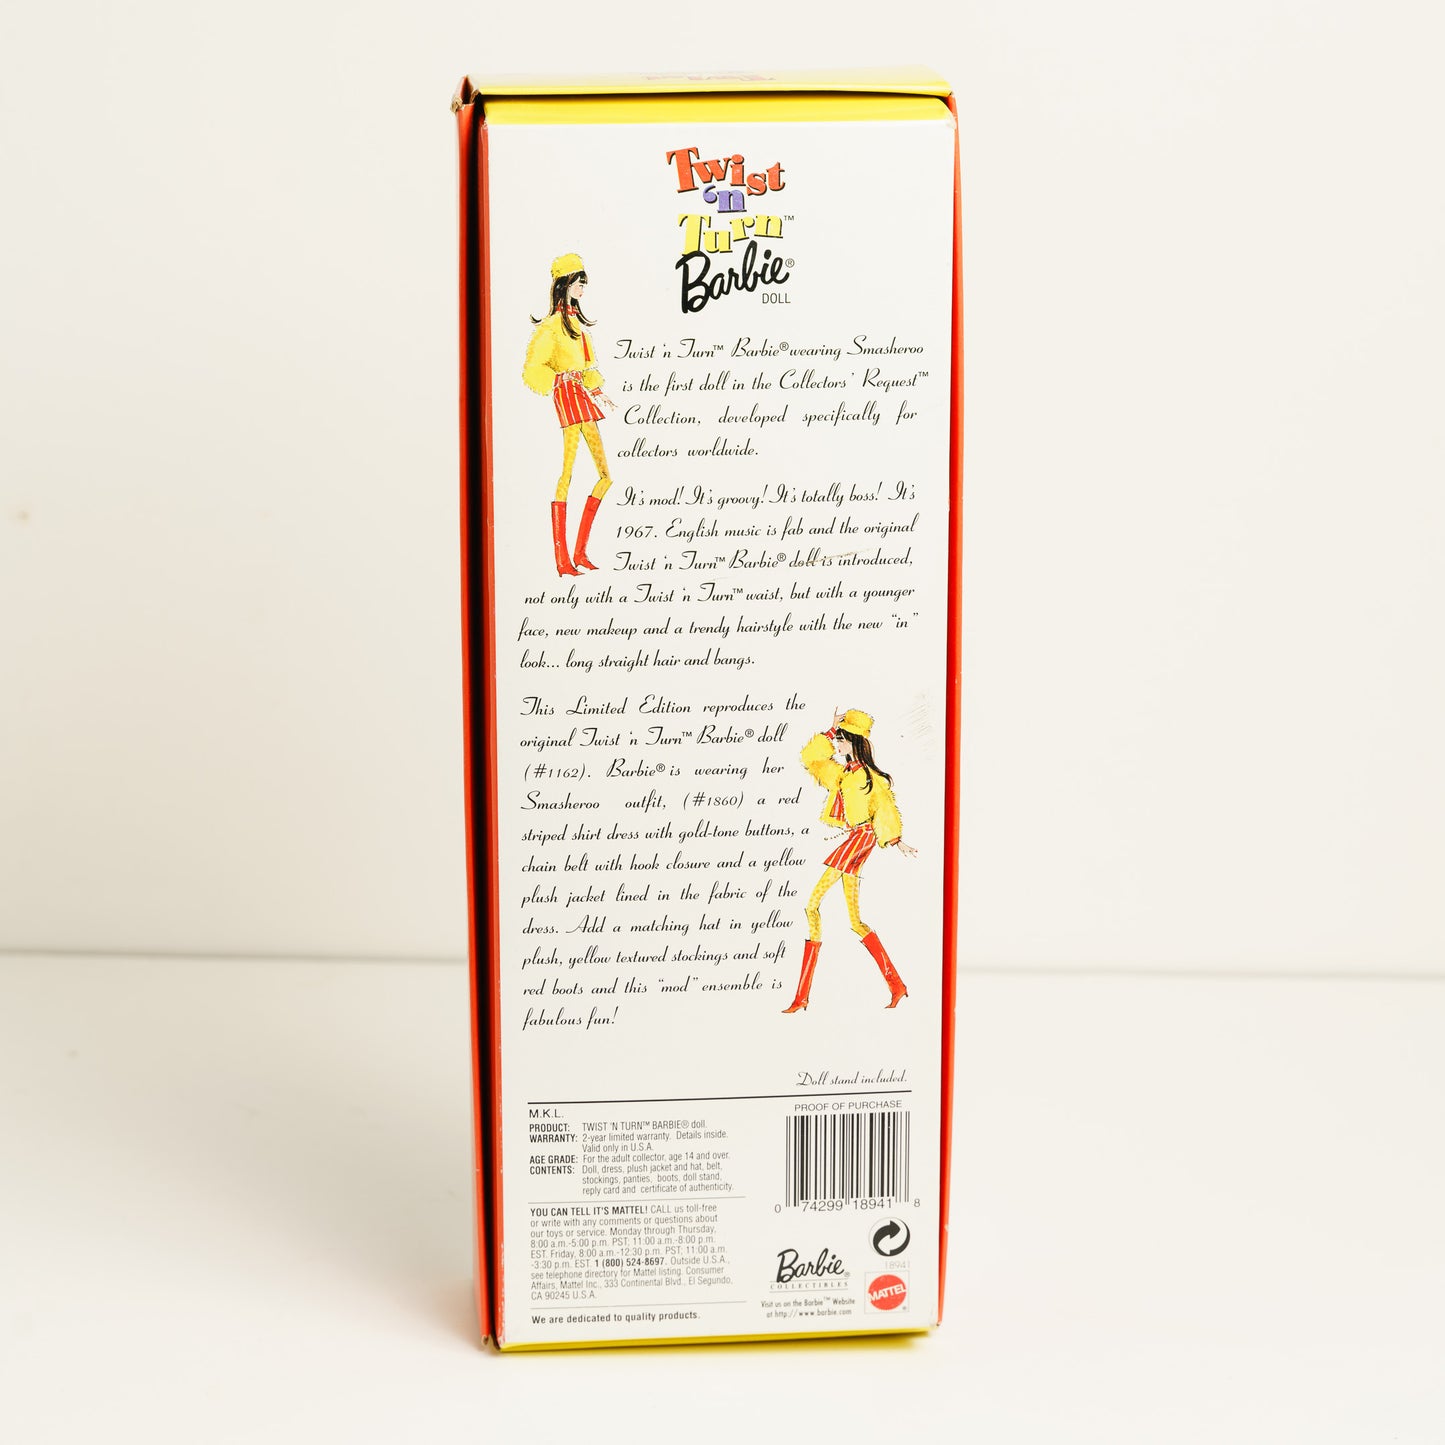 Twist and Turn Barbie Reproduction from 1967 - NIB